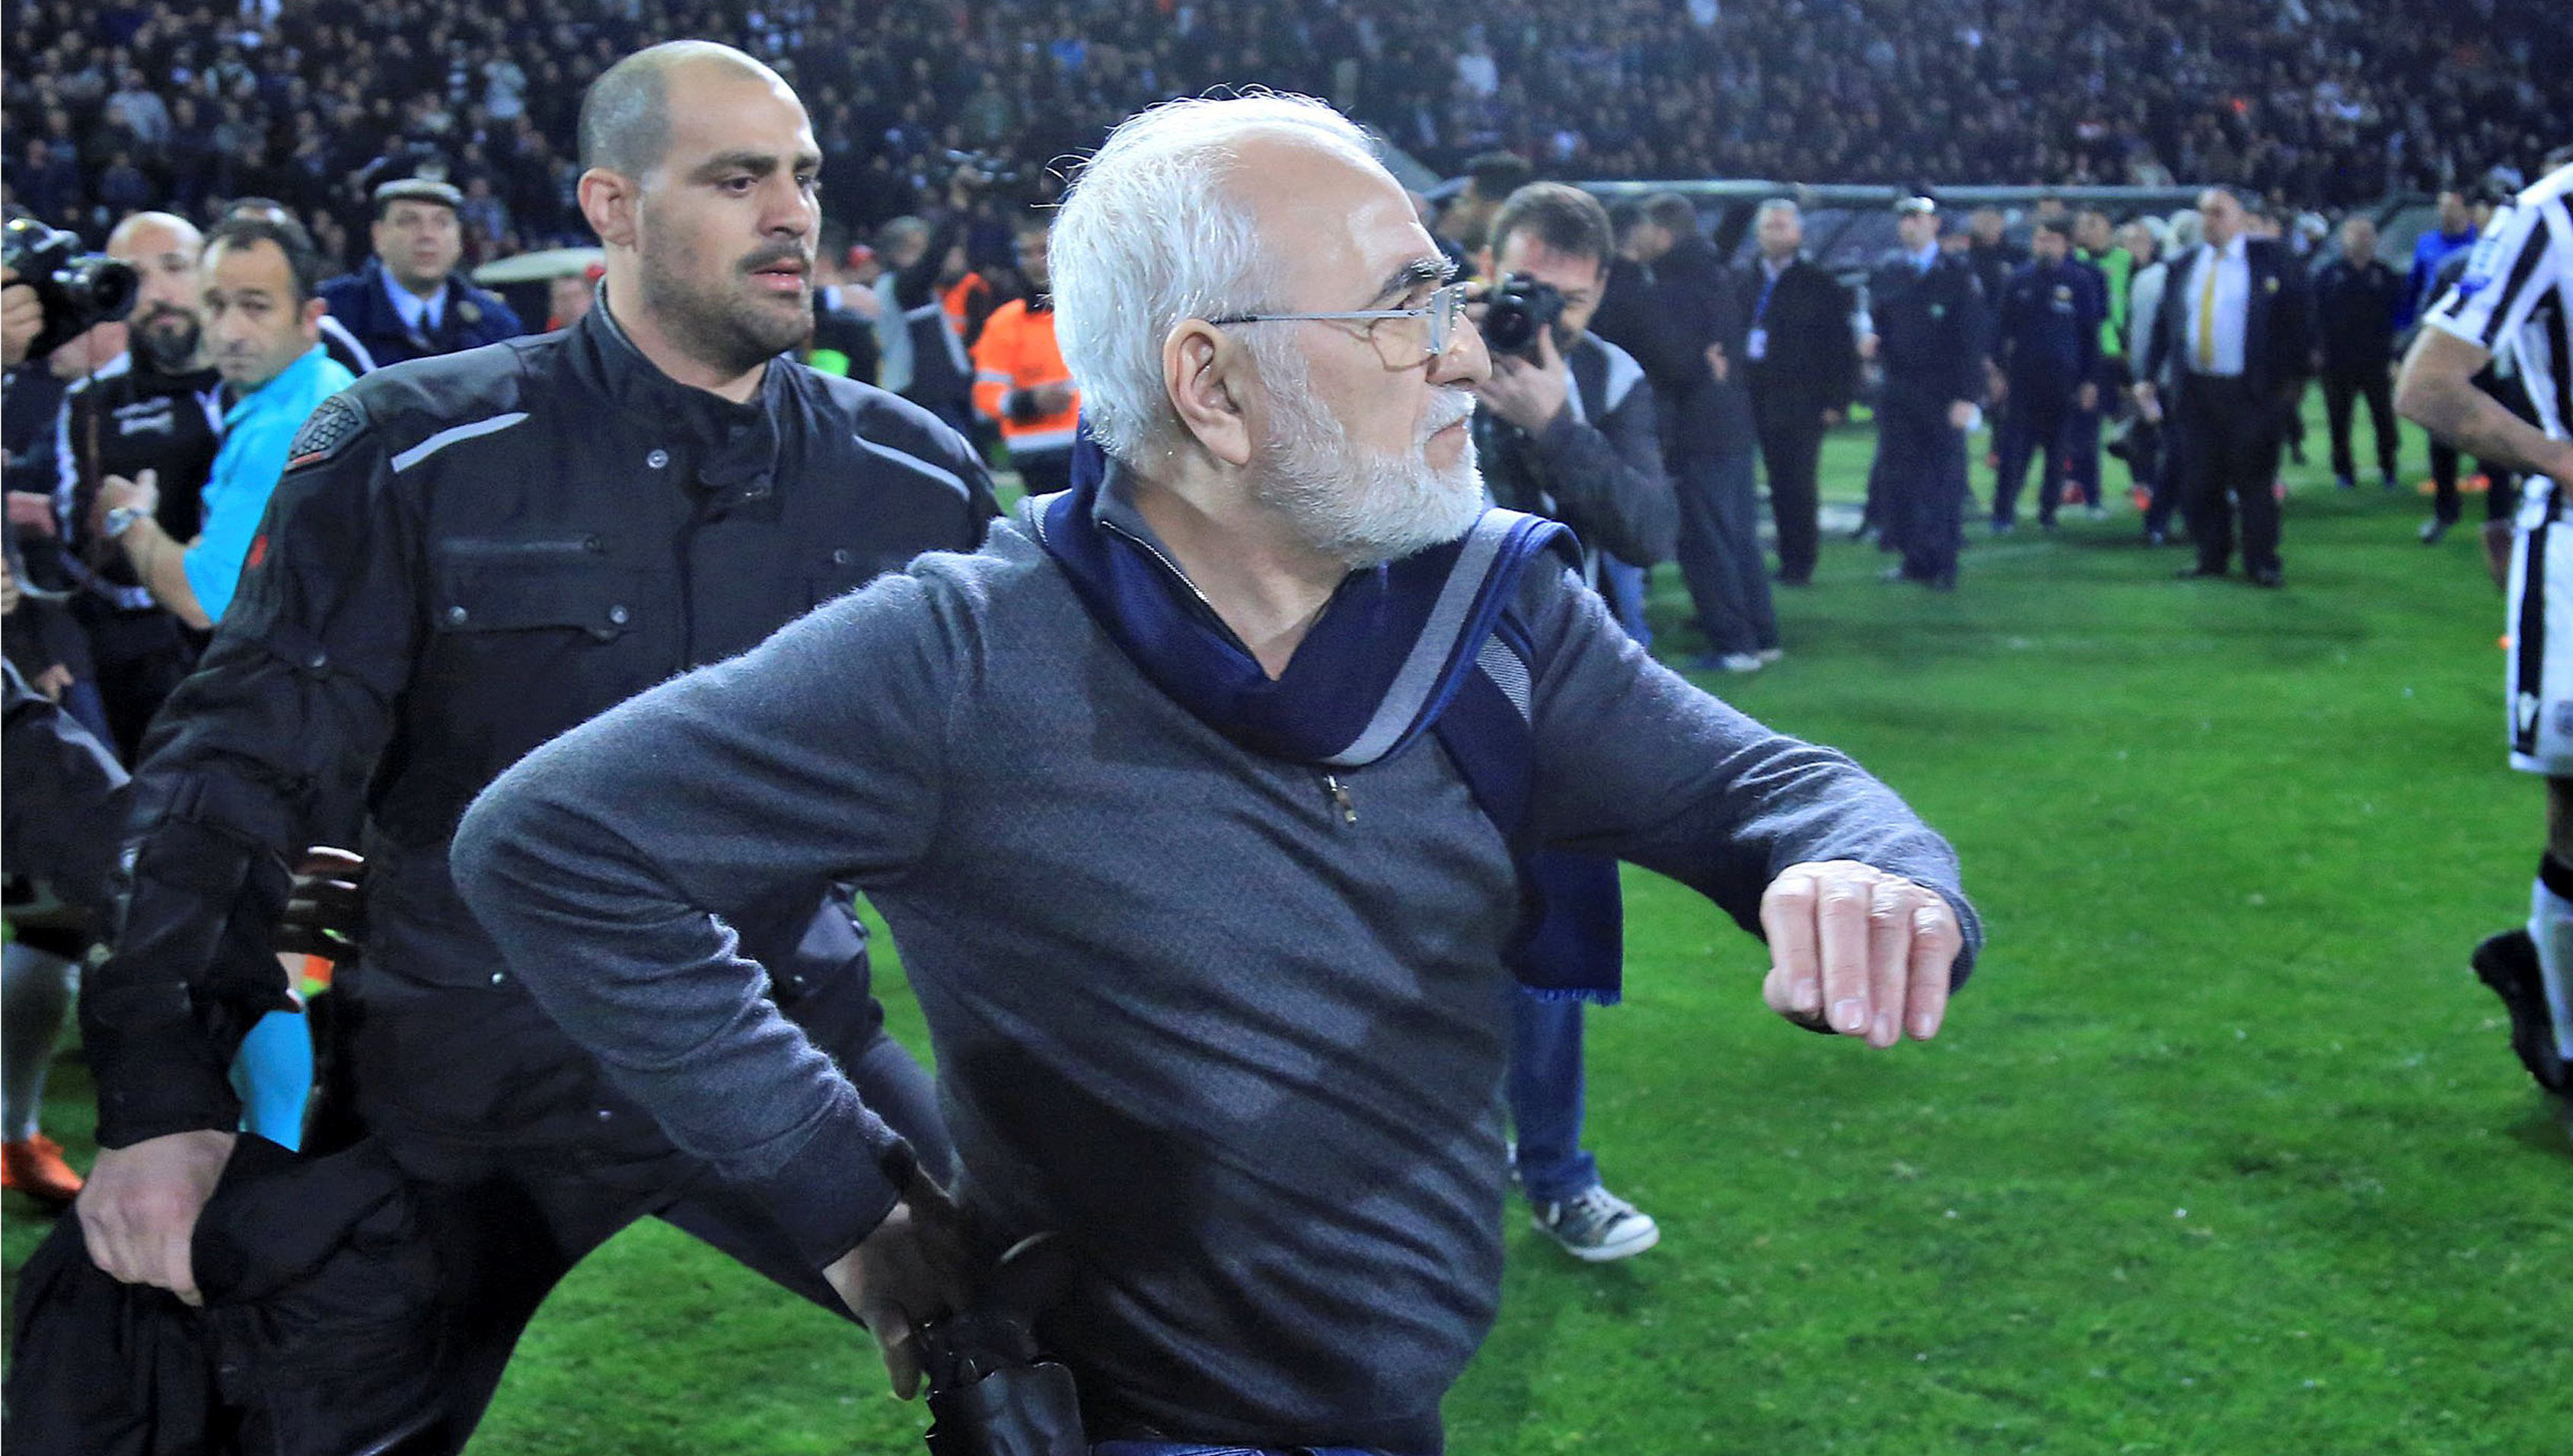 Paok Salonika president Ivan Savvidis invade the pitch with a gun to confront the referee. Net photo